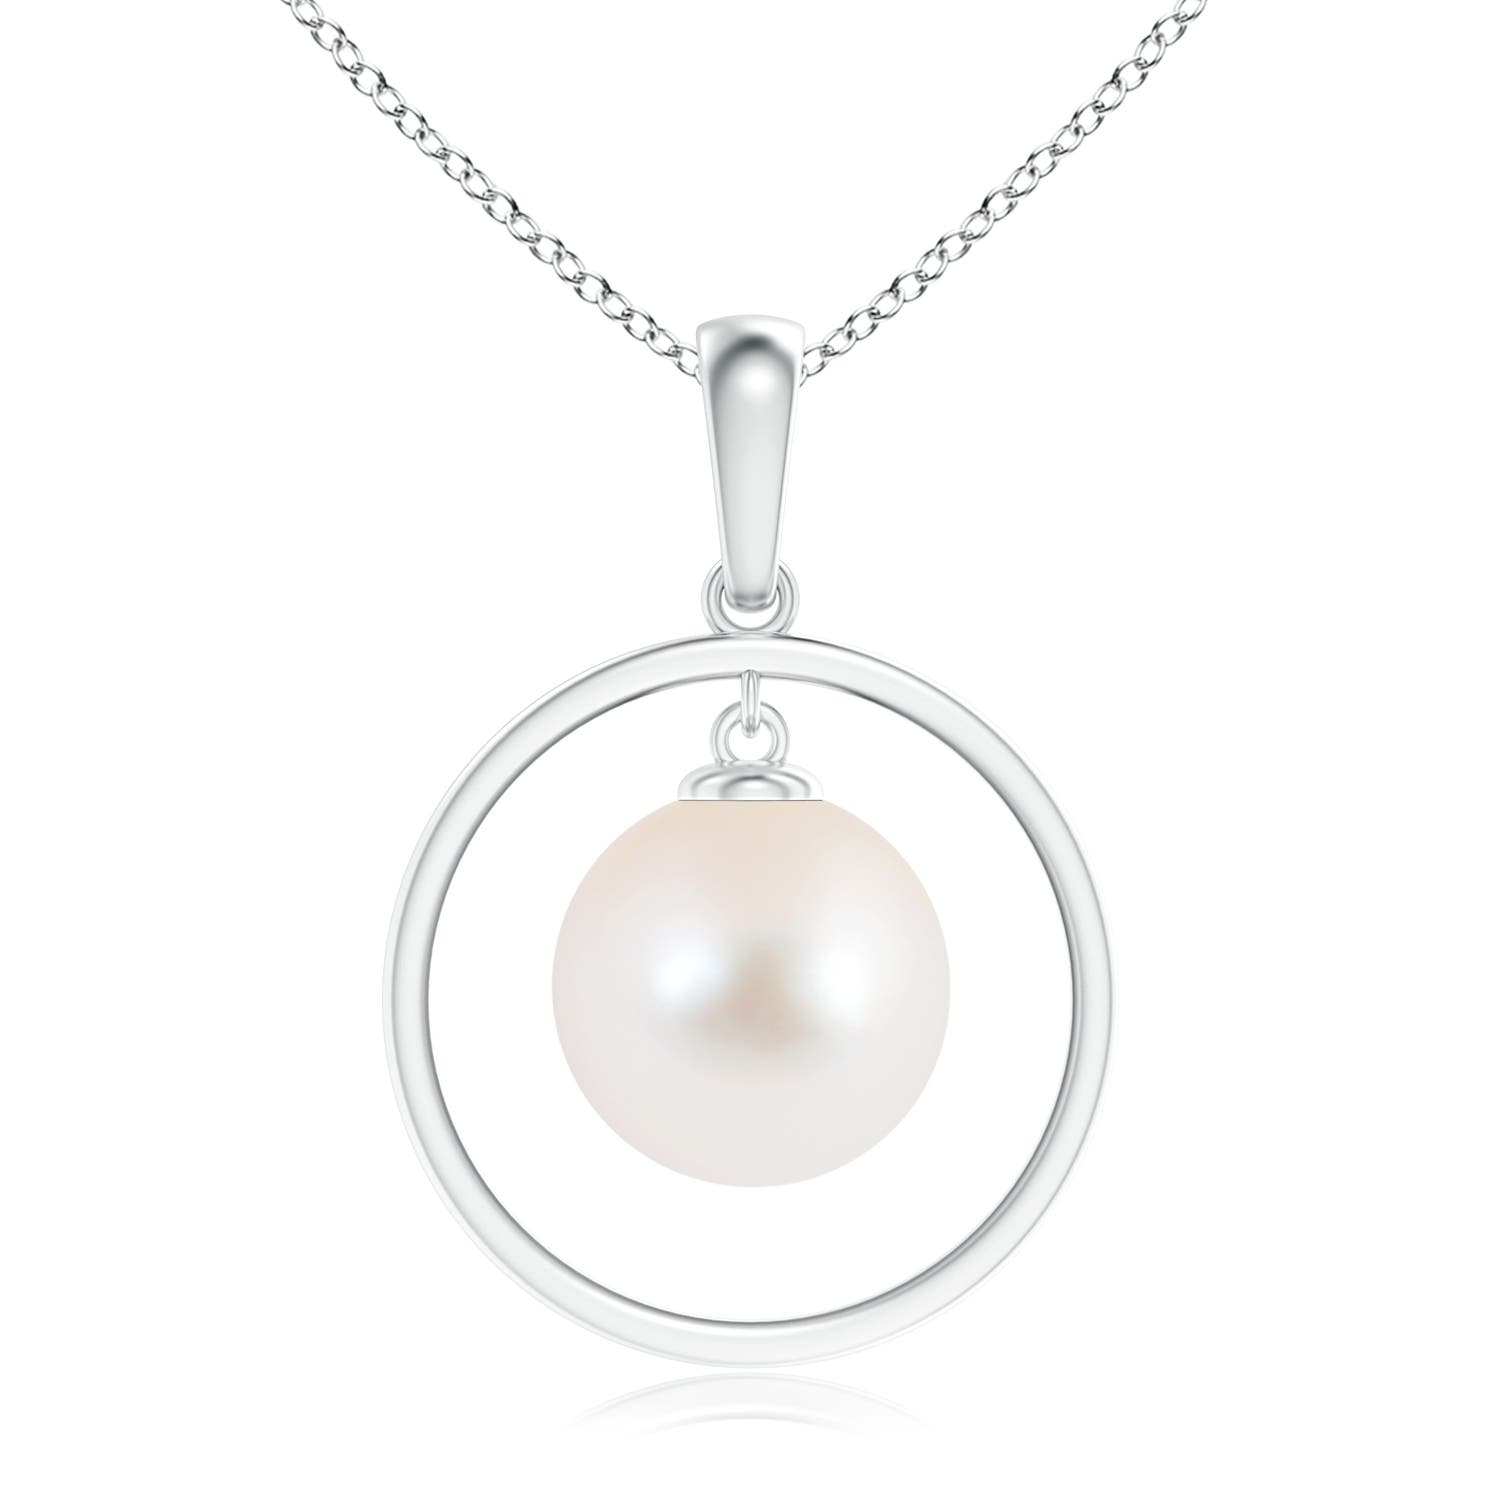 AAA - Freshwater Cultured Pearl / 7.2 CT / 14 KT White Gold